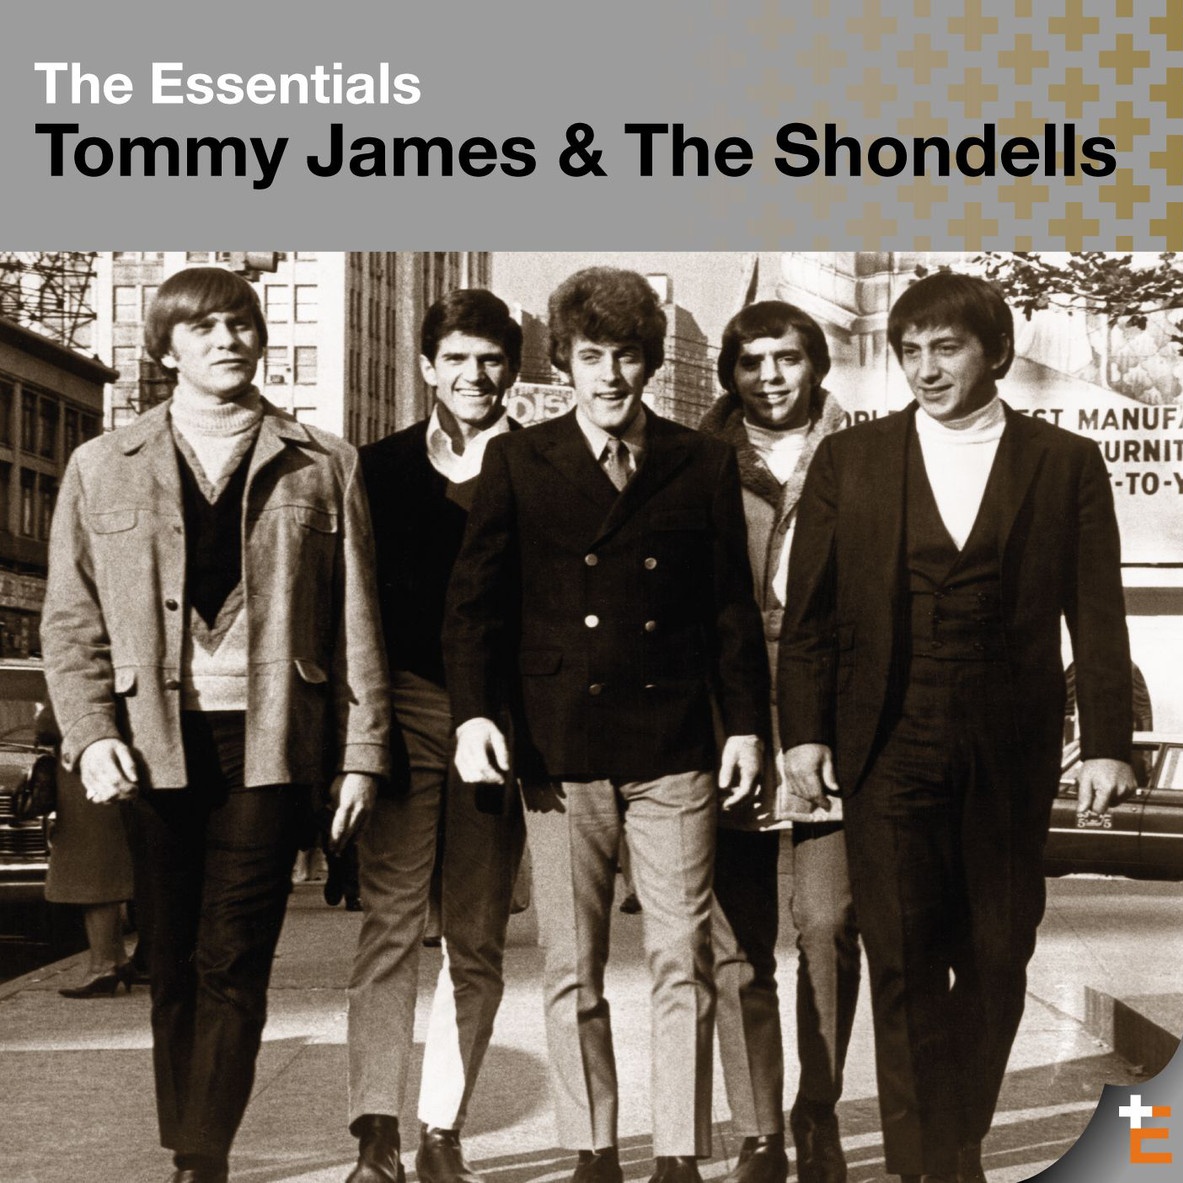 The Essentials: Tommy James & The Shondells